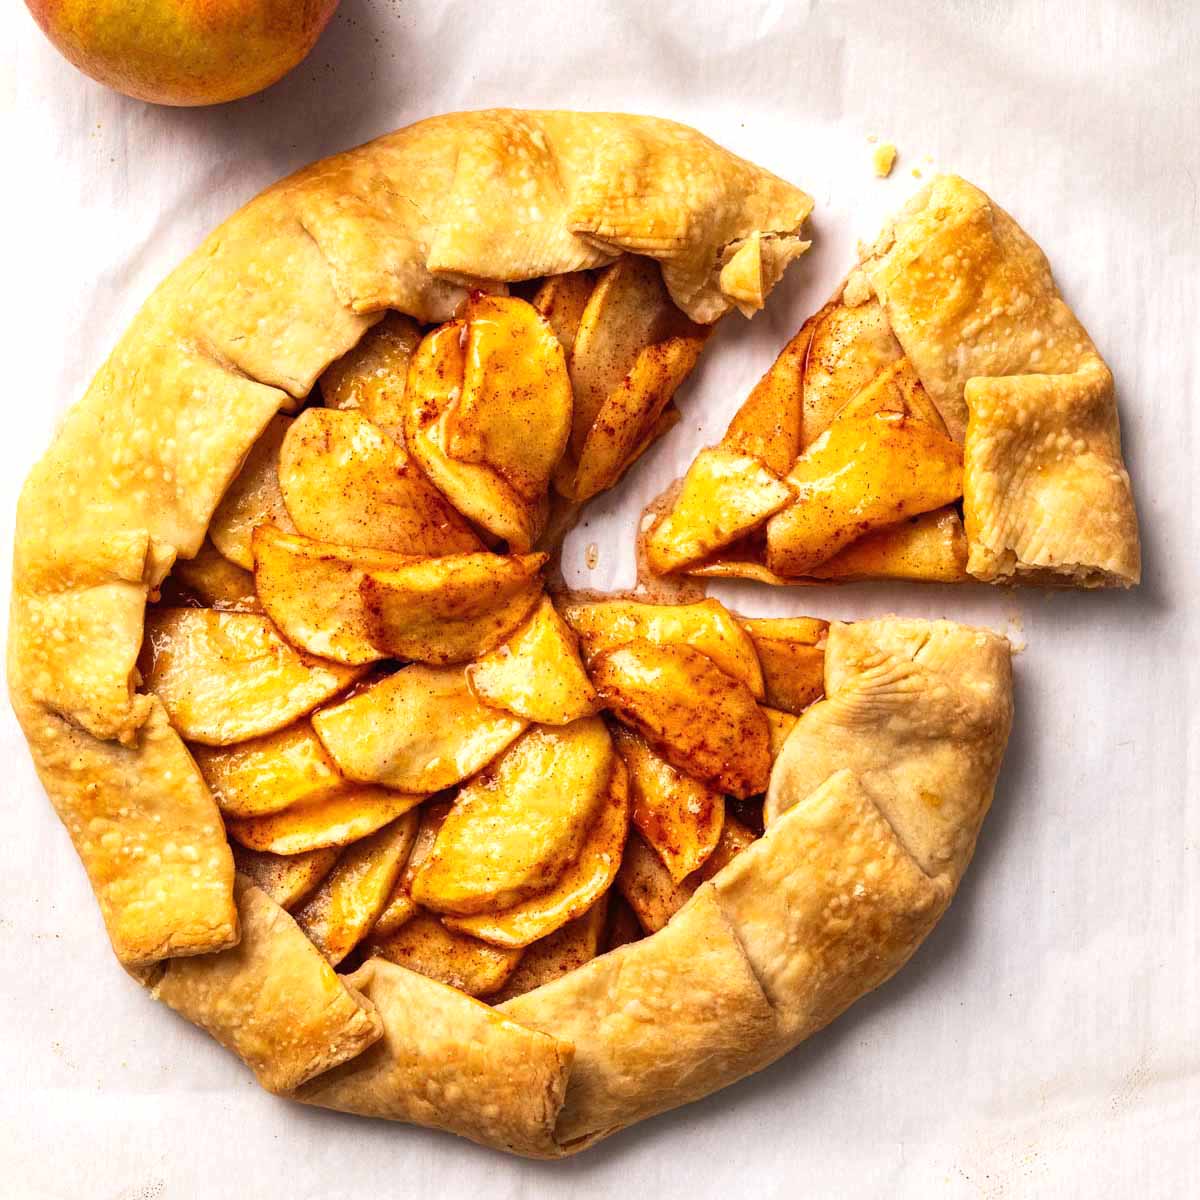 Overhead view of an apple galette with a slice cut out